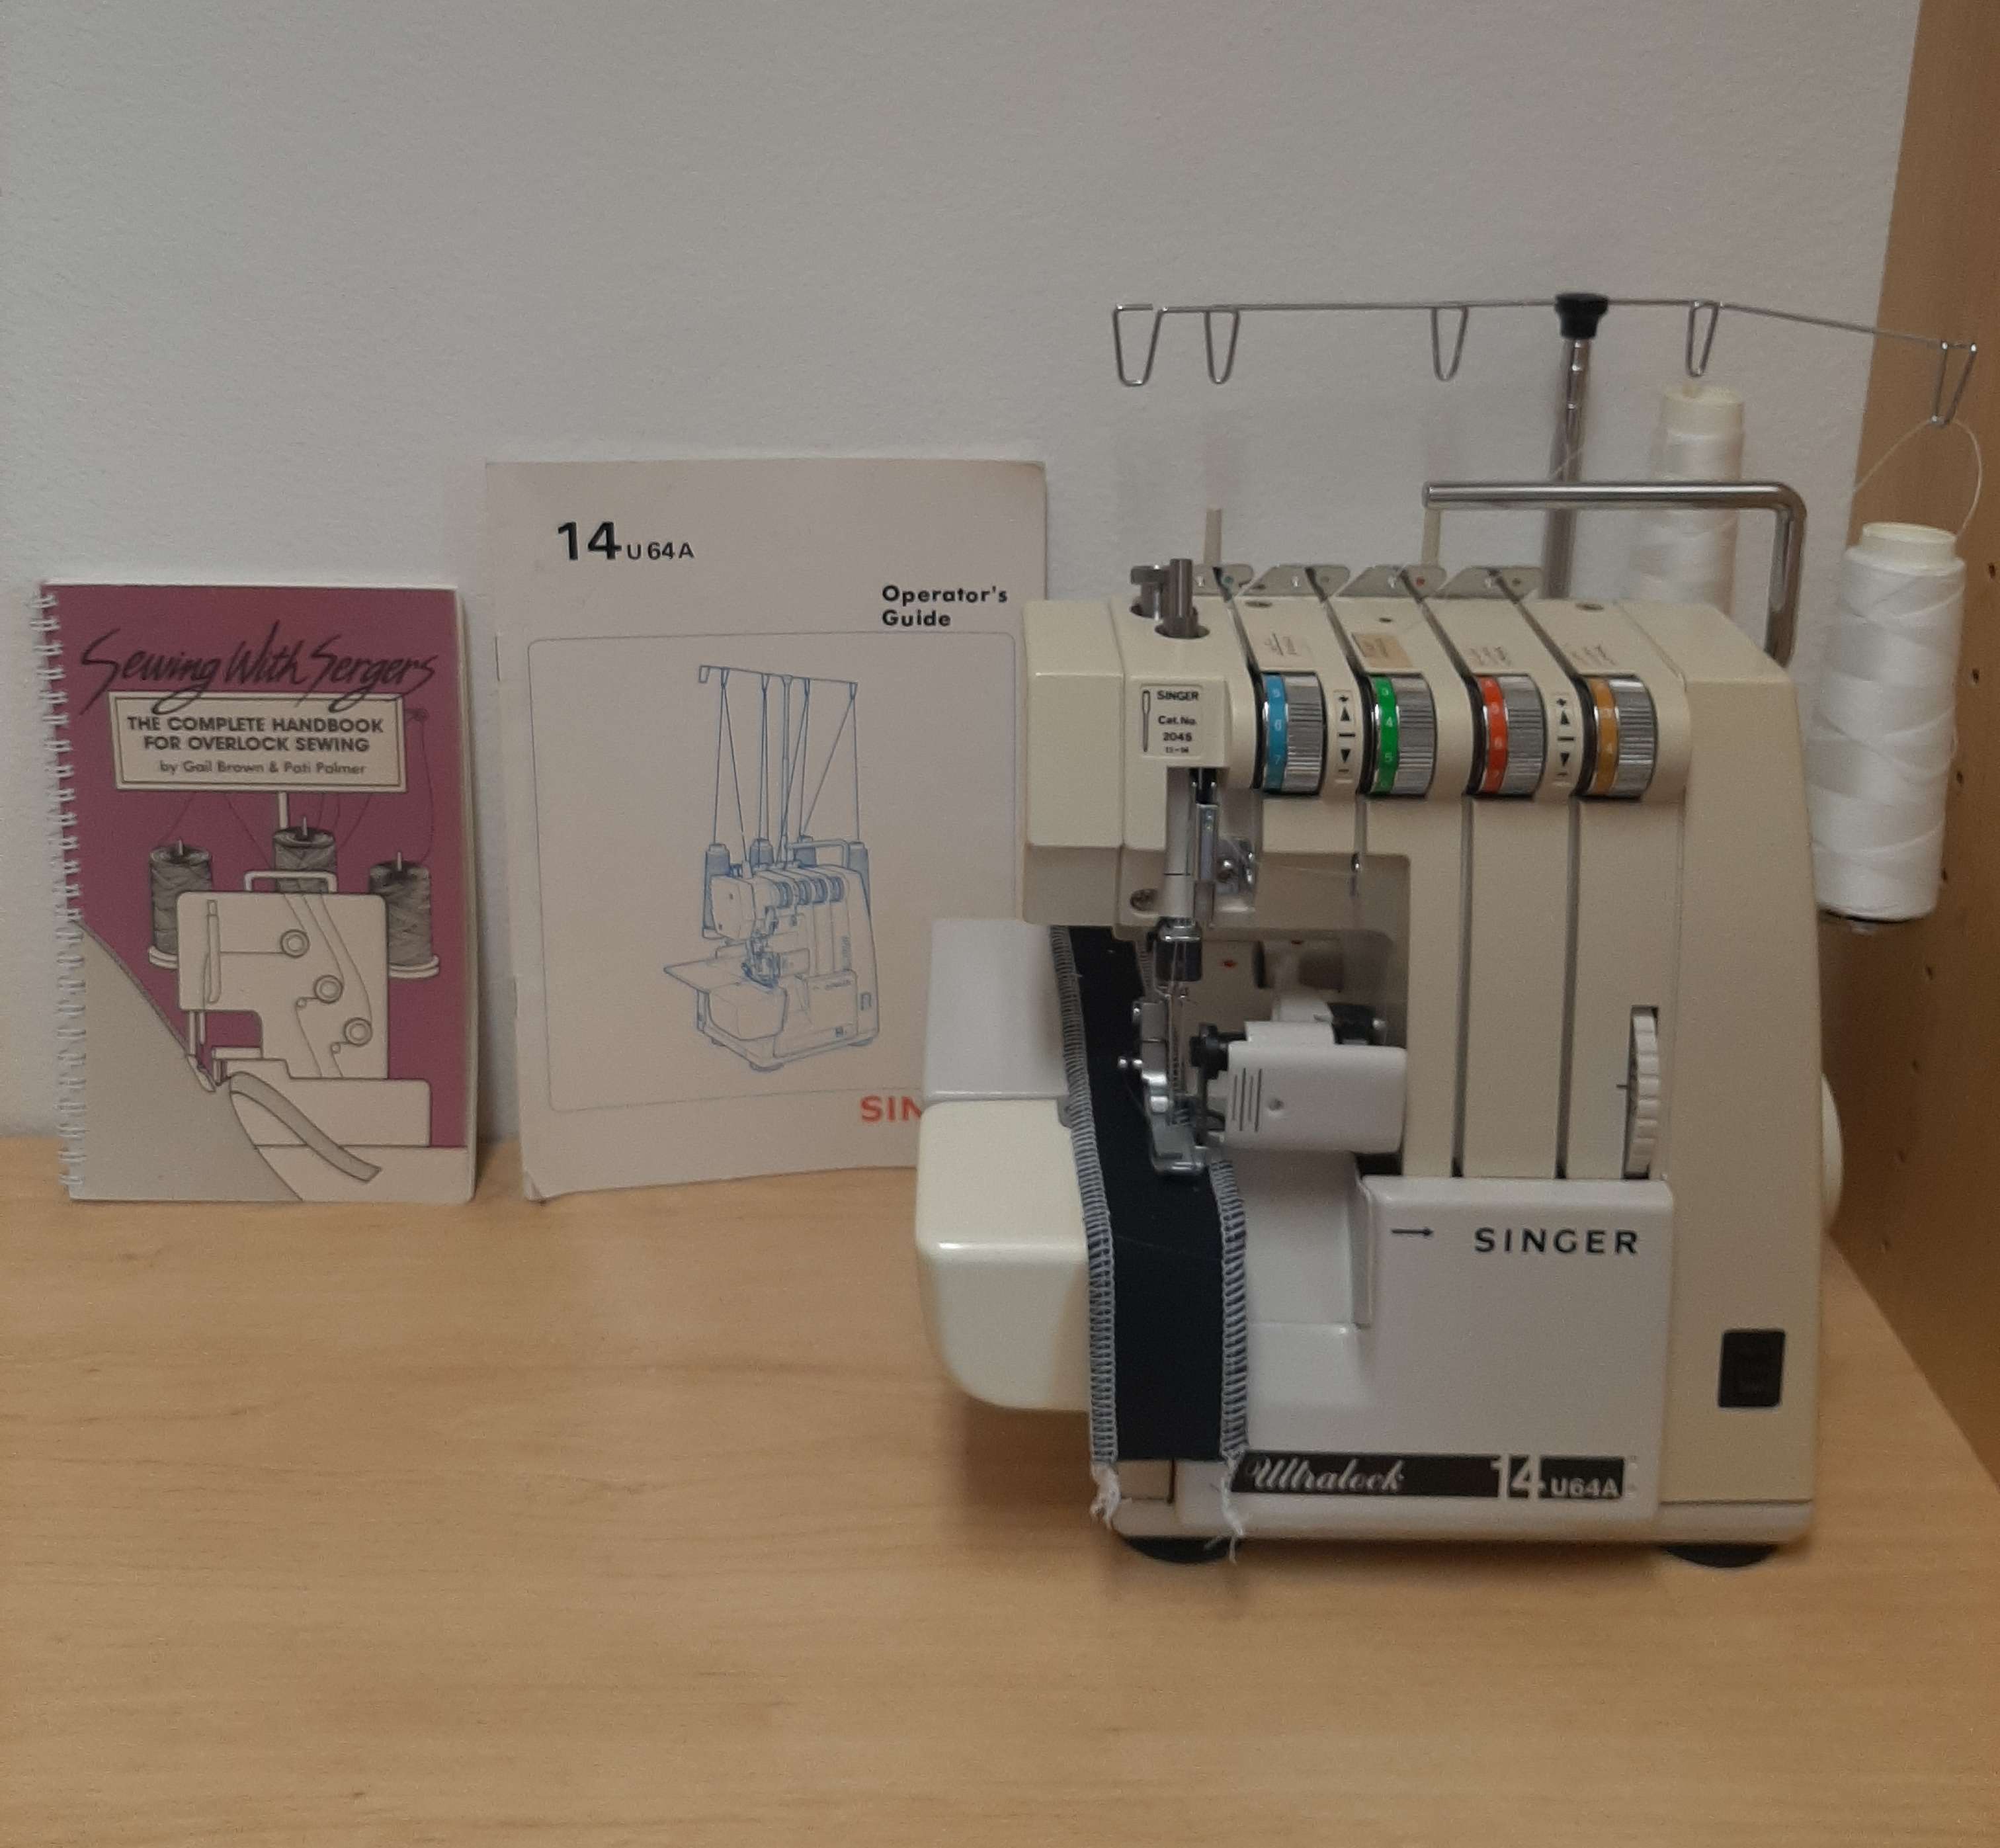 Is anyone familiar with this serger model? Singer Ultralock Model 14U34B :  r/sewing